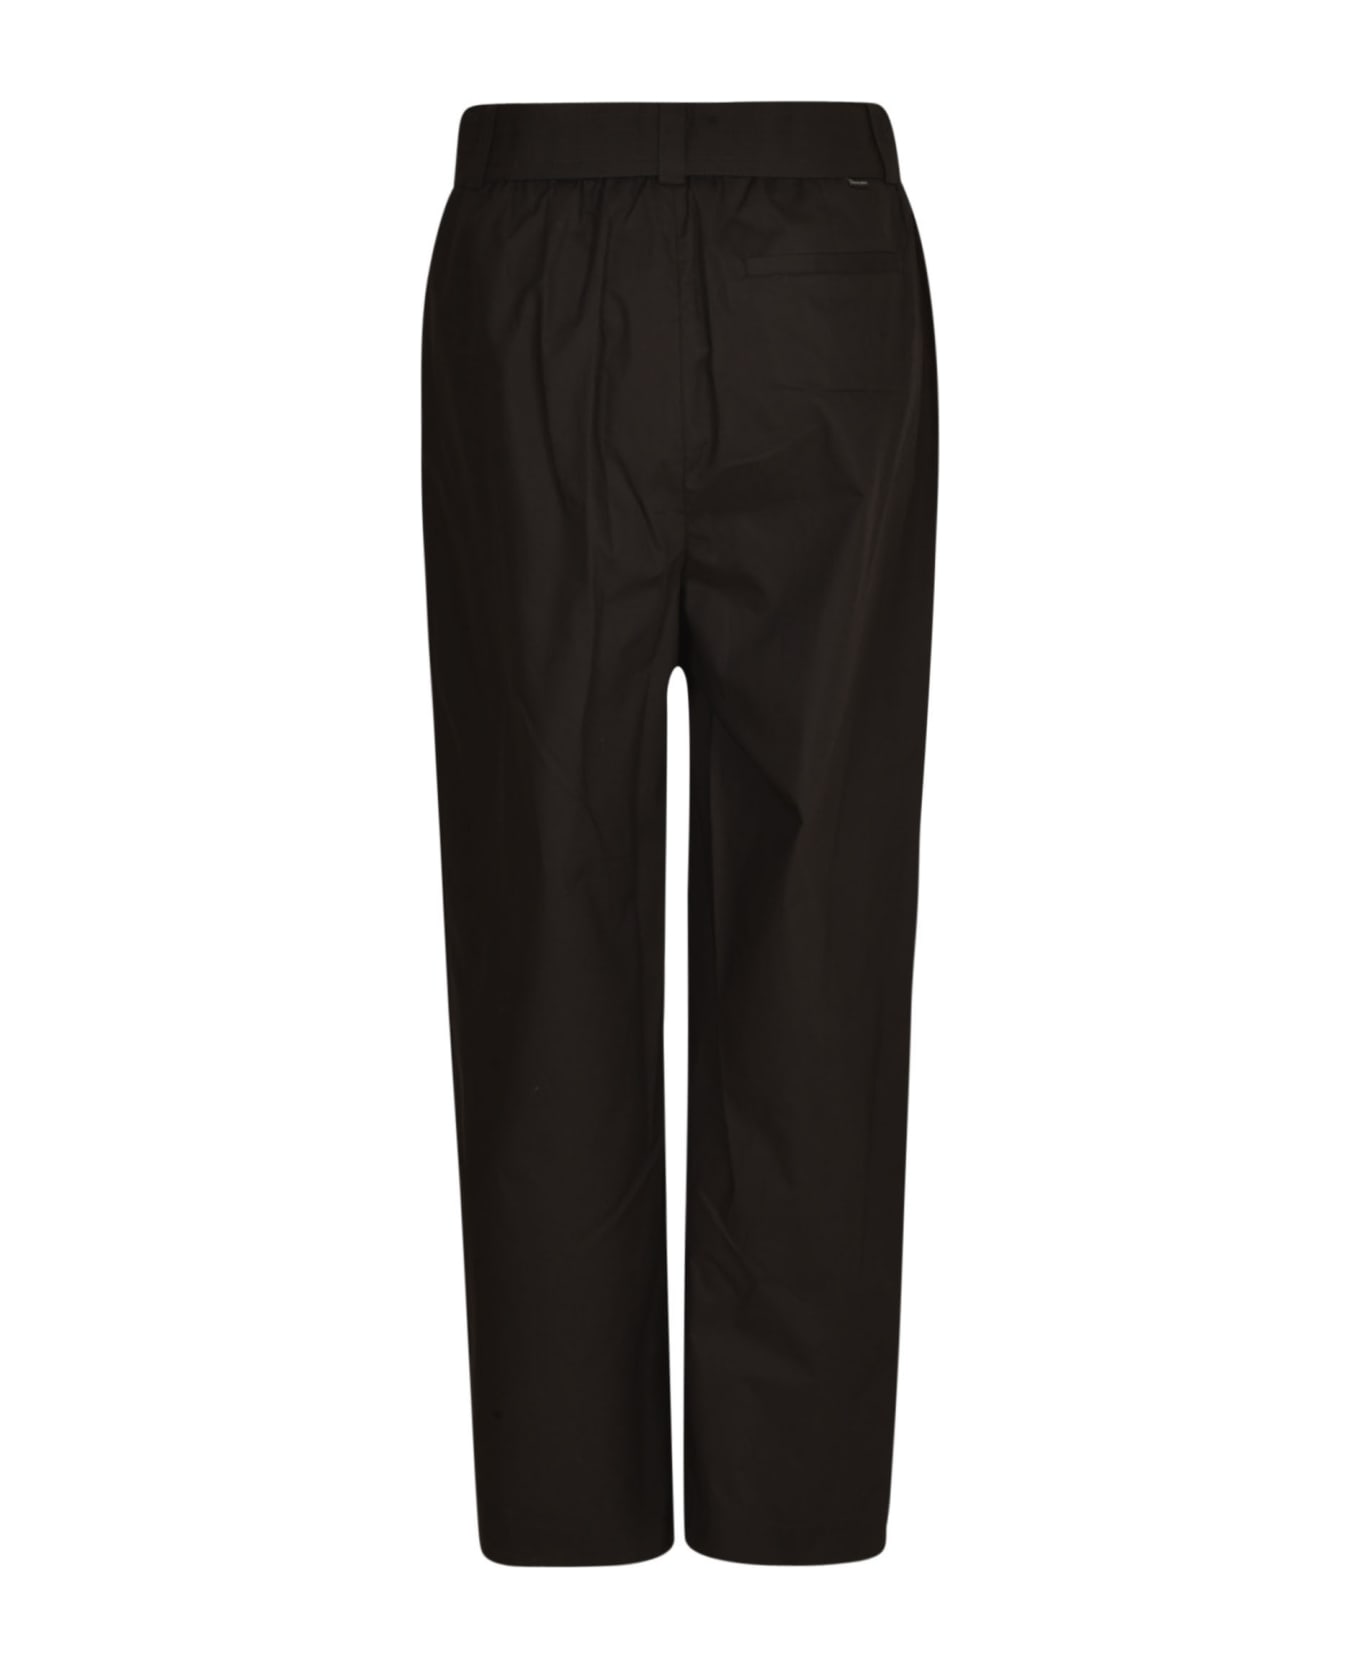 Woolrich Belted Trousers - Black ボトムス